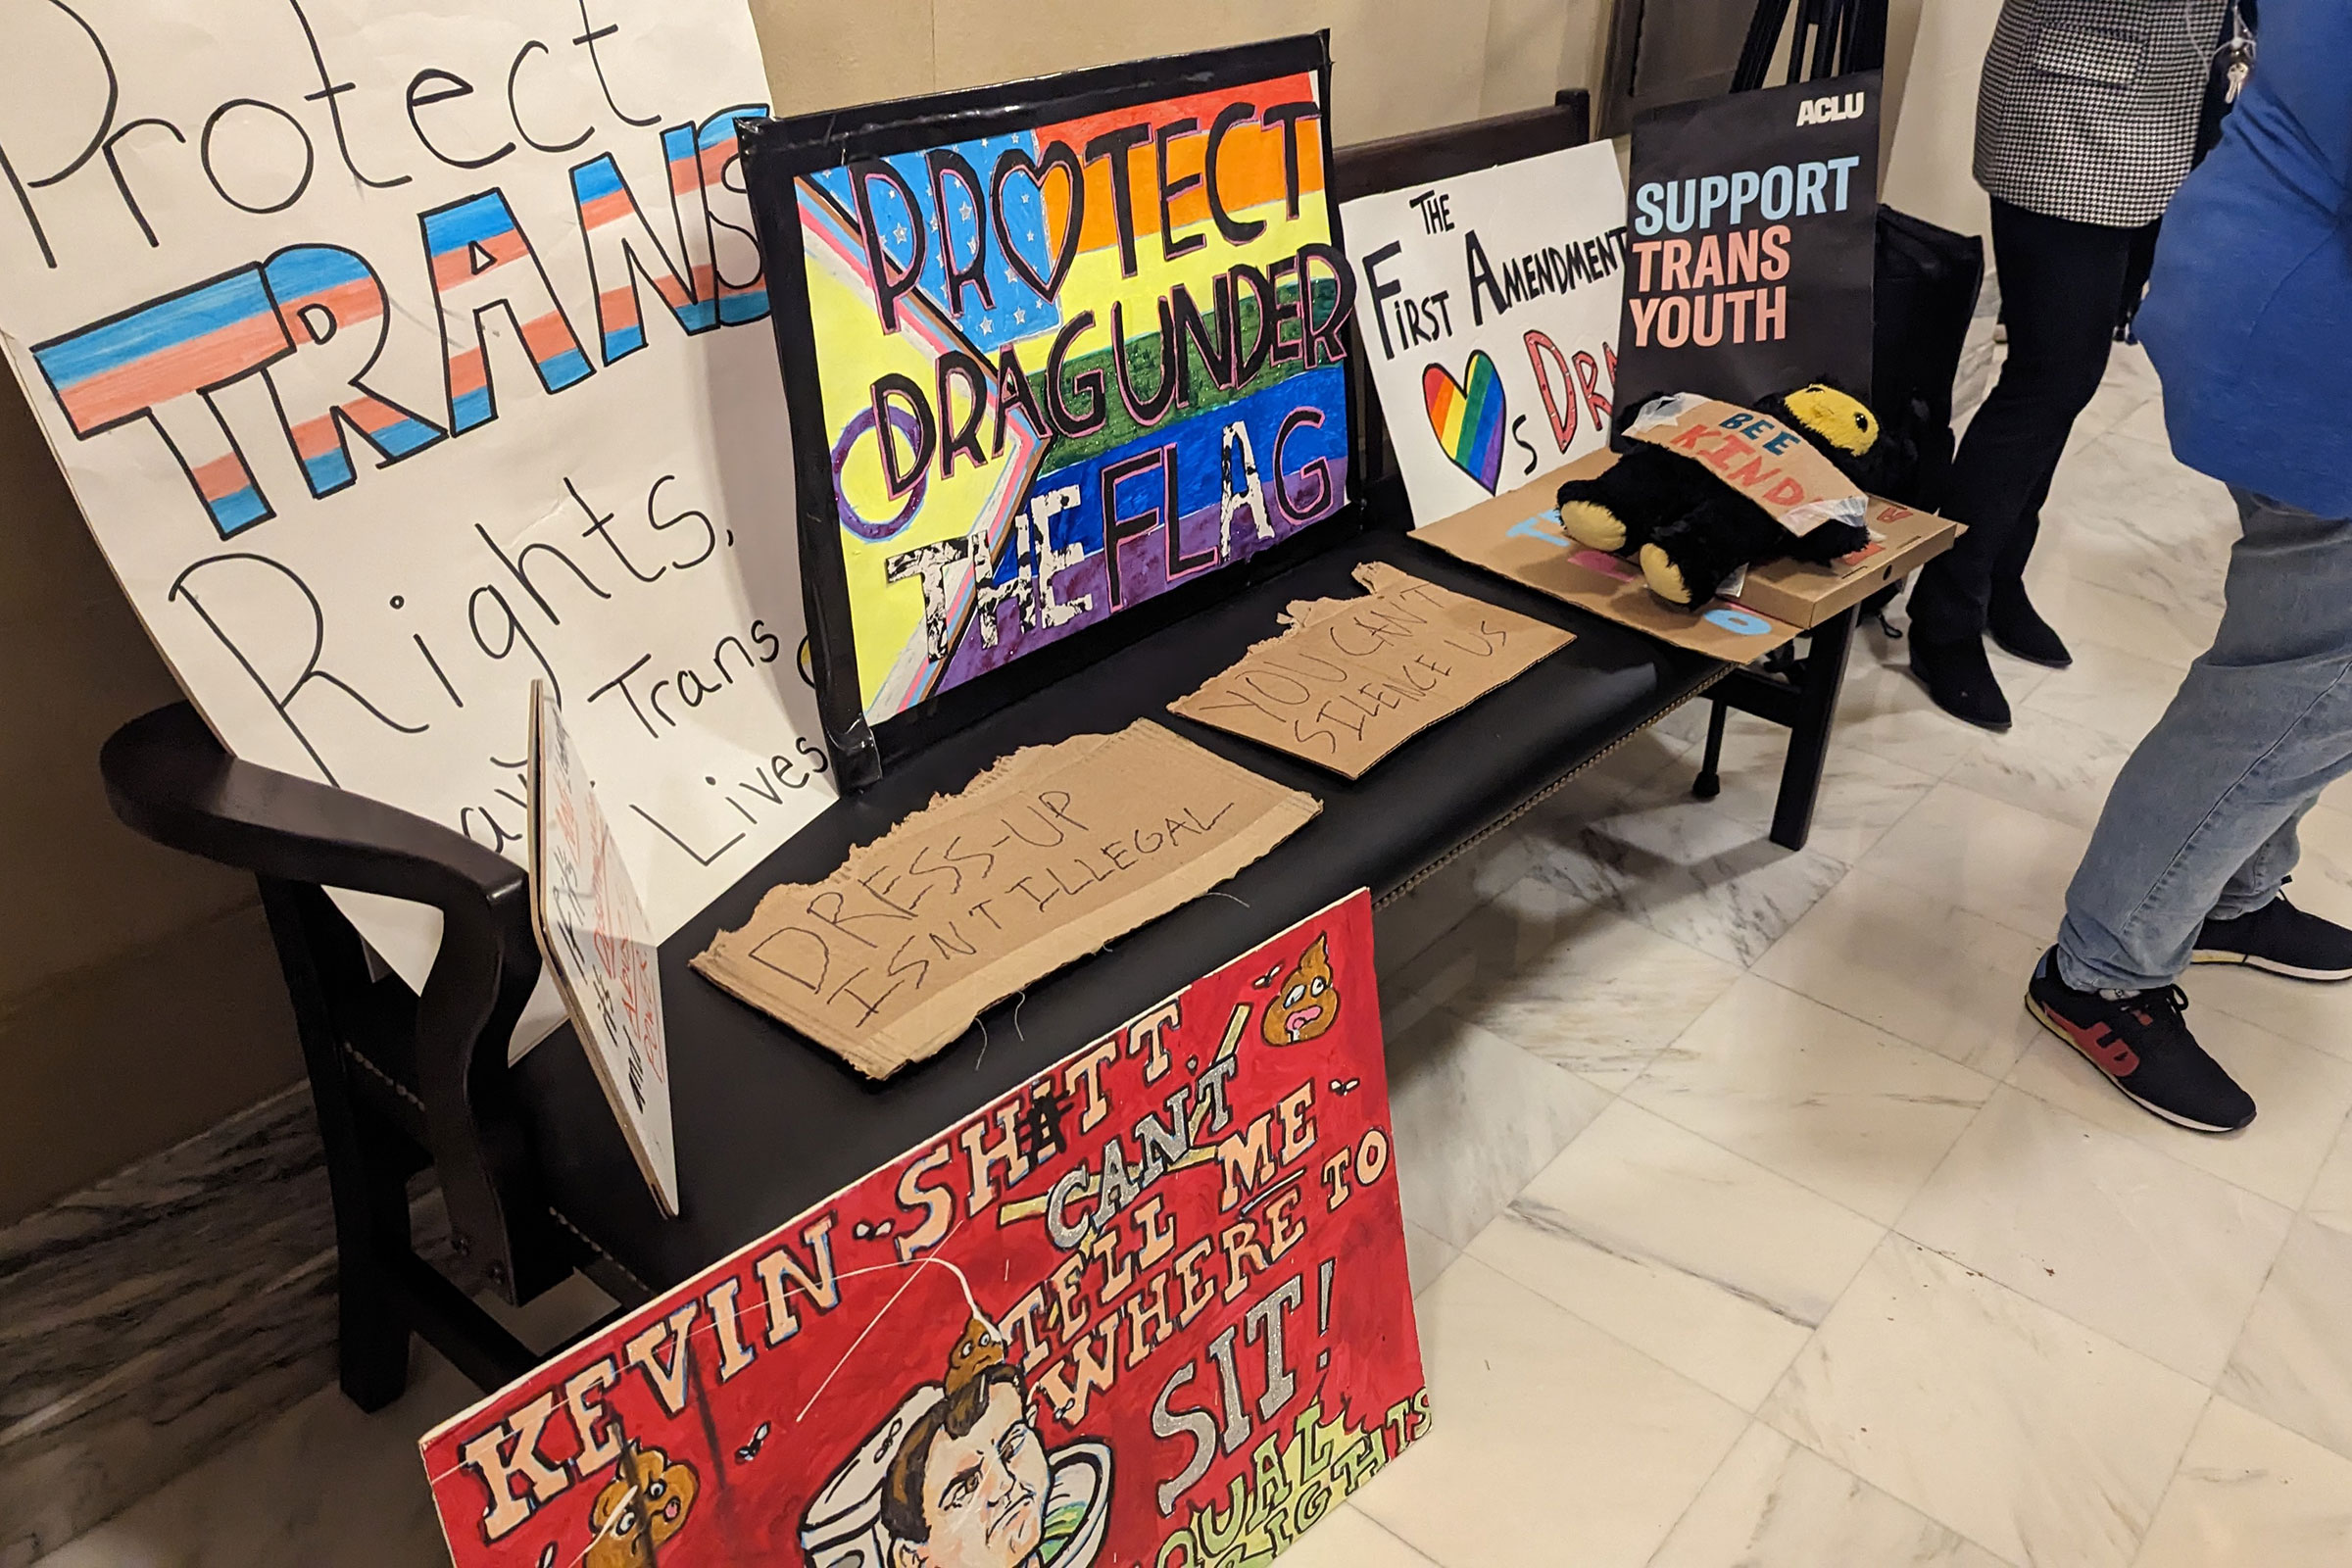 Posters made in support of drag performers and transgender rights are set up in the Oklahoma Capitol building, in Oklahoma City, Okla. on Feb. 22, 2023. (Courtesy of Freedom Oklahoma)